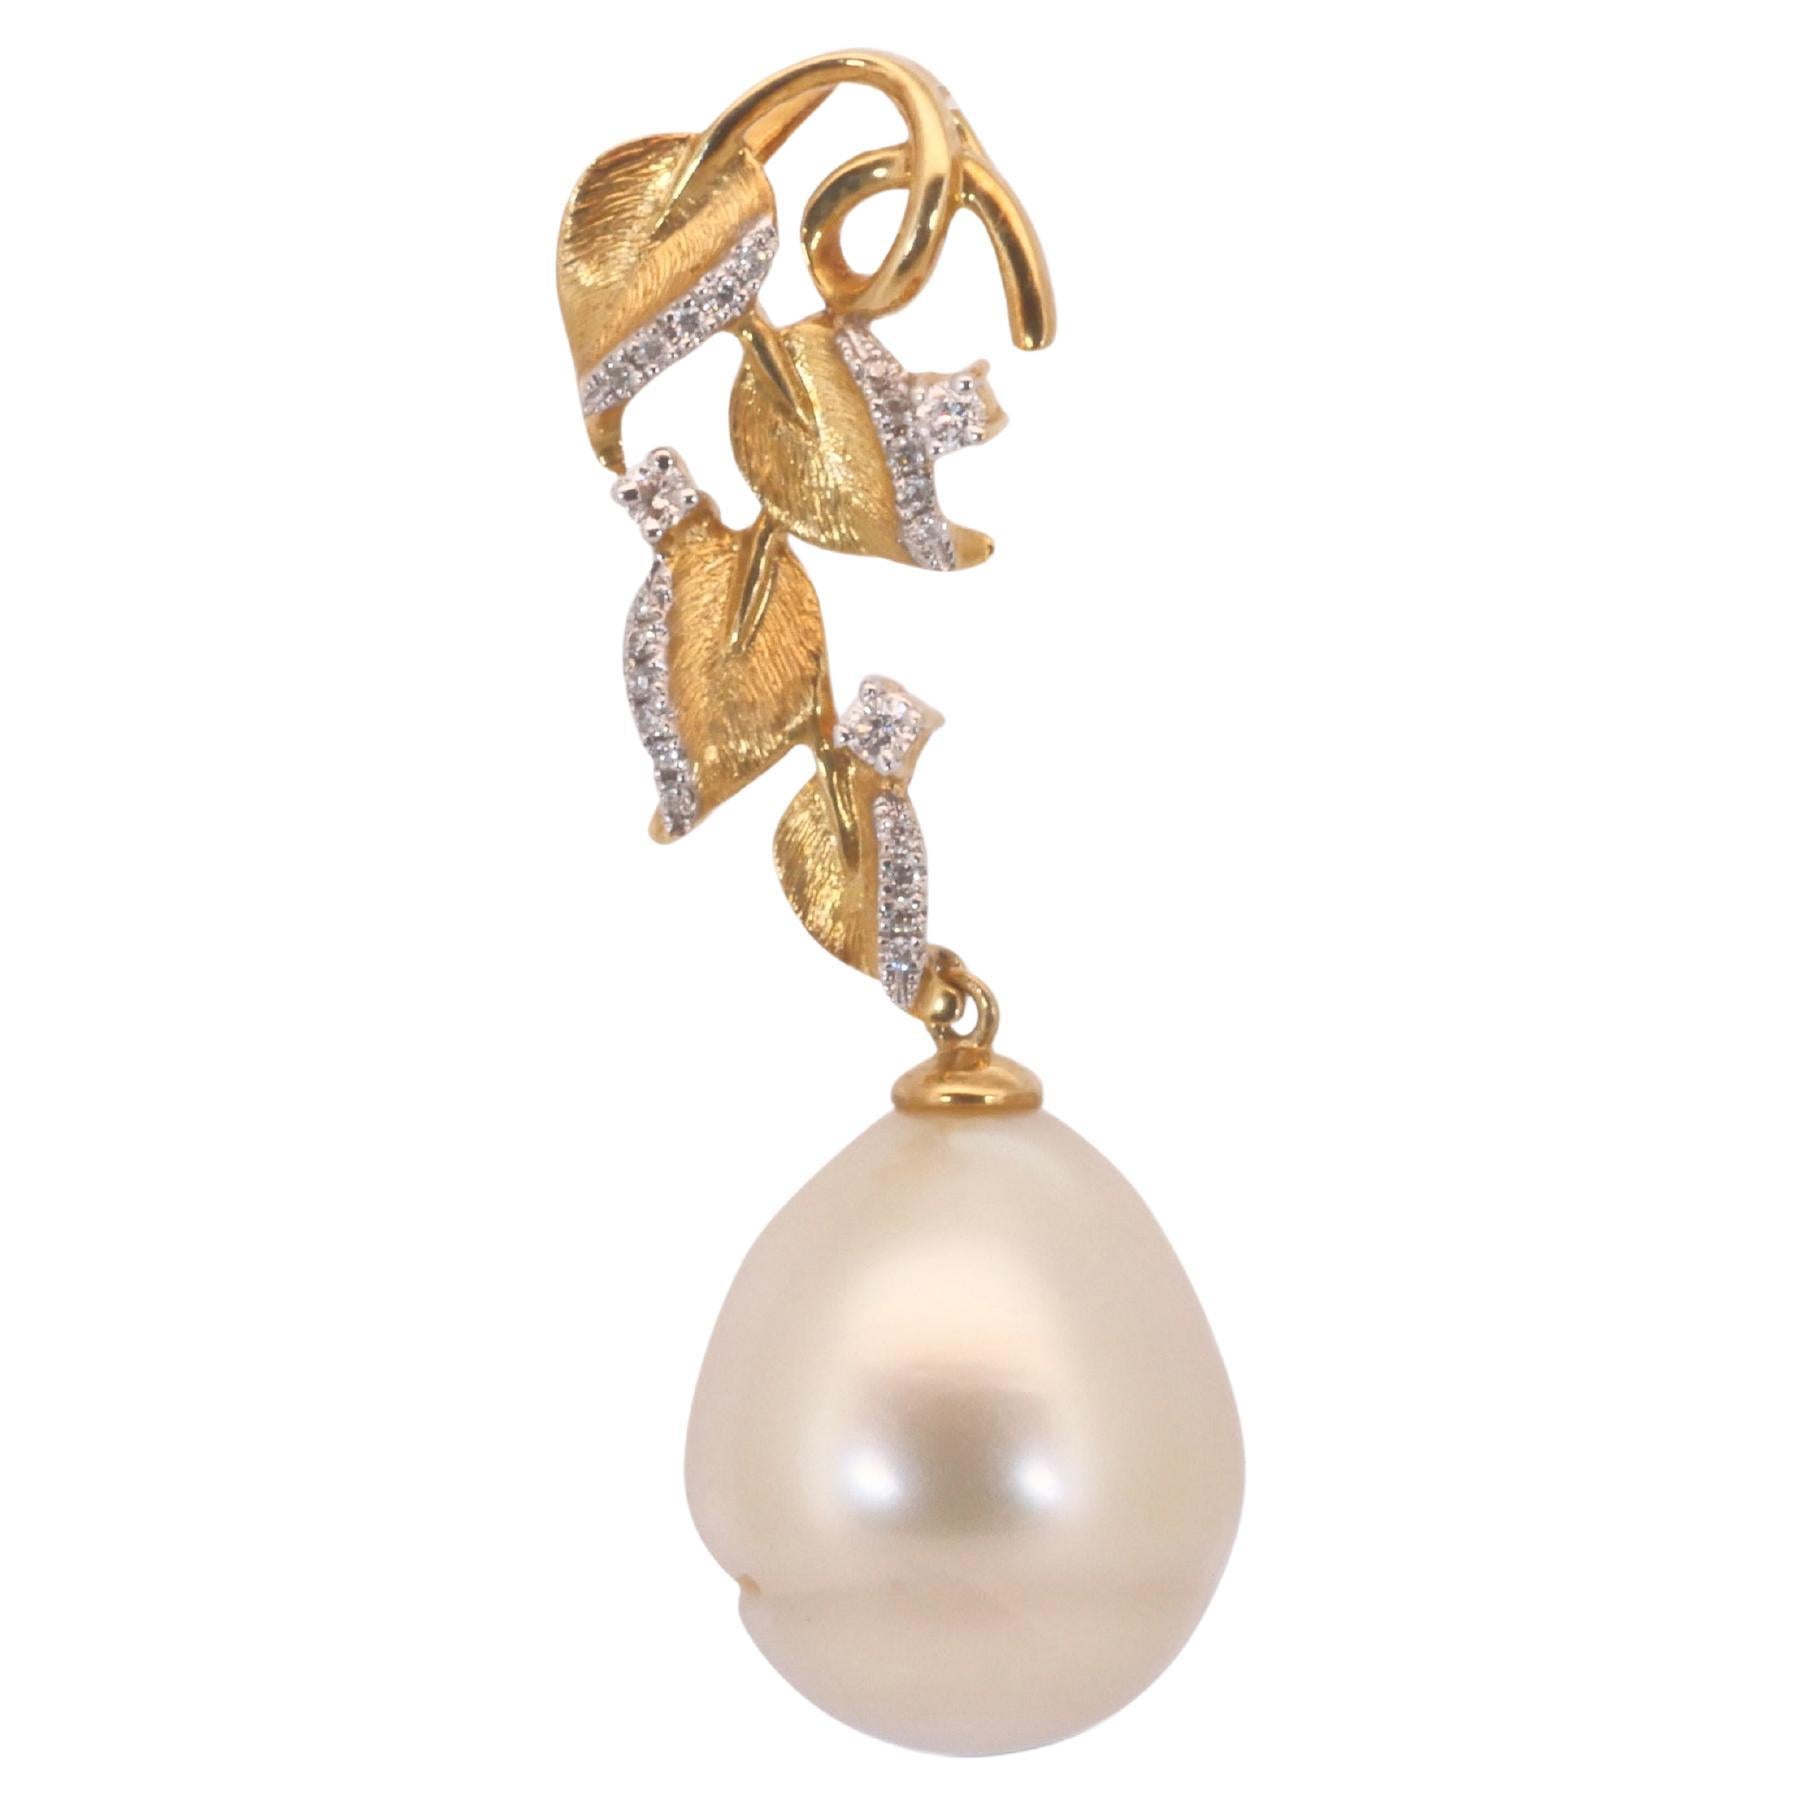 Splendid 18k Yellow Gold Pendant w/0.1 Carat Pearl & Diamonds-Chain not included For Sale